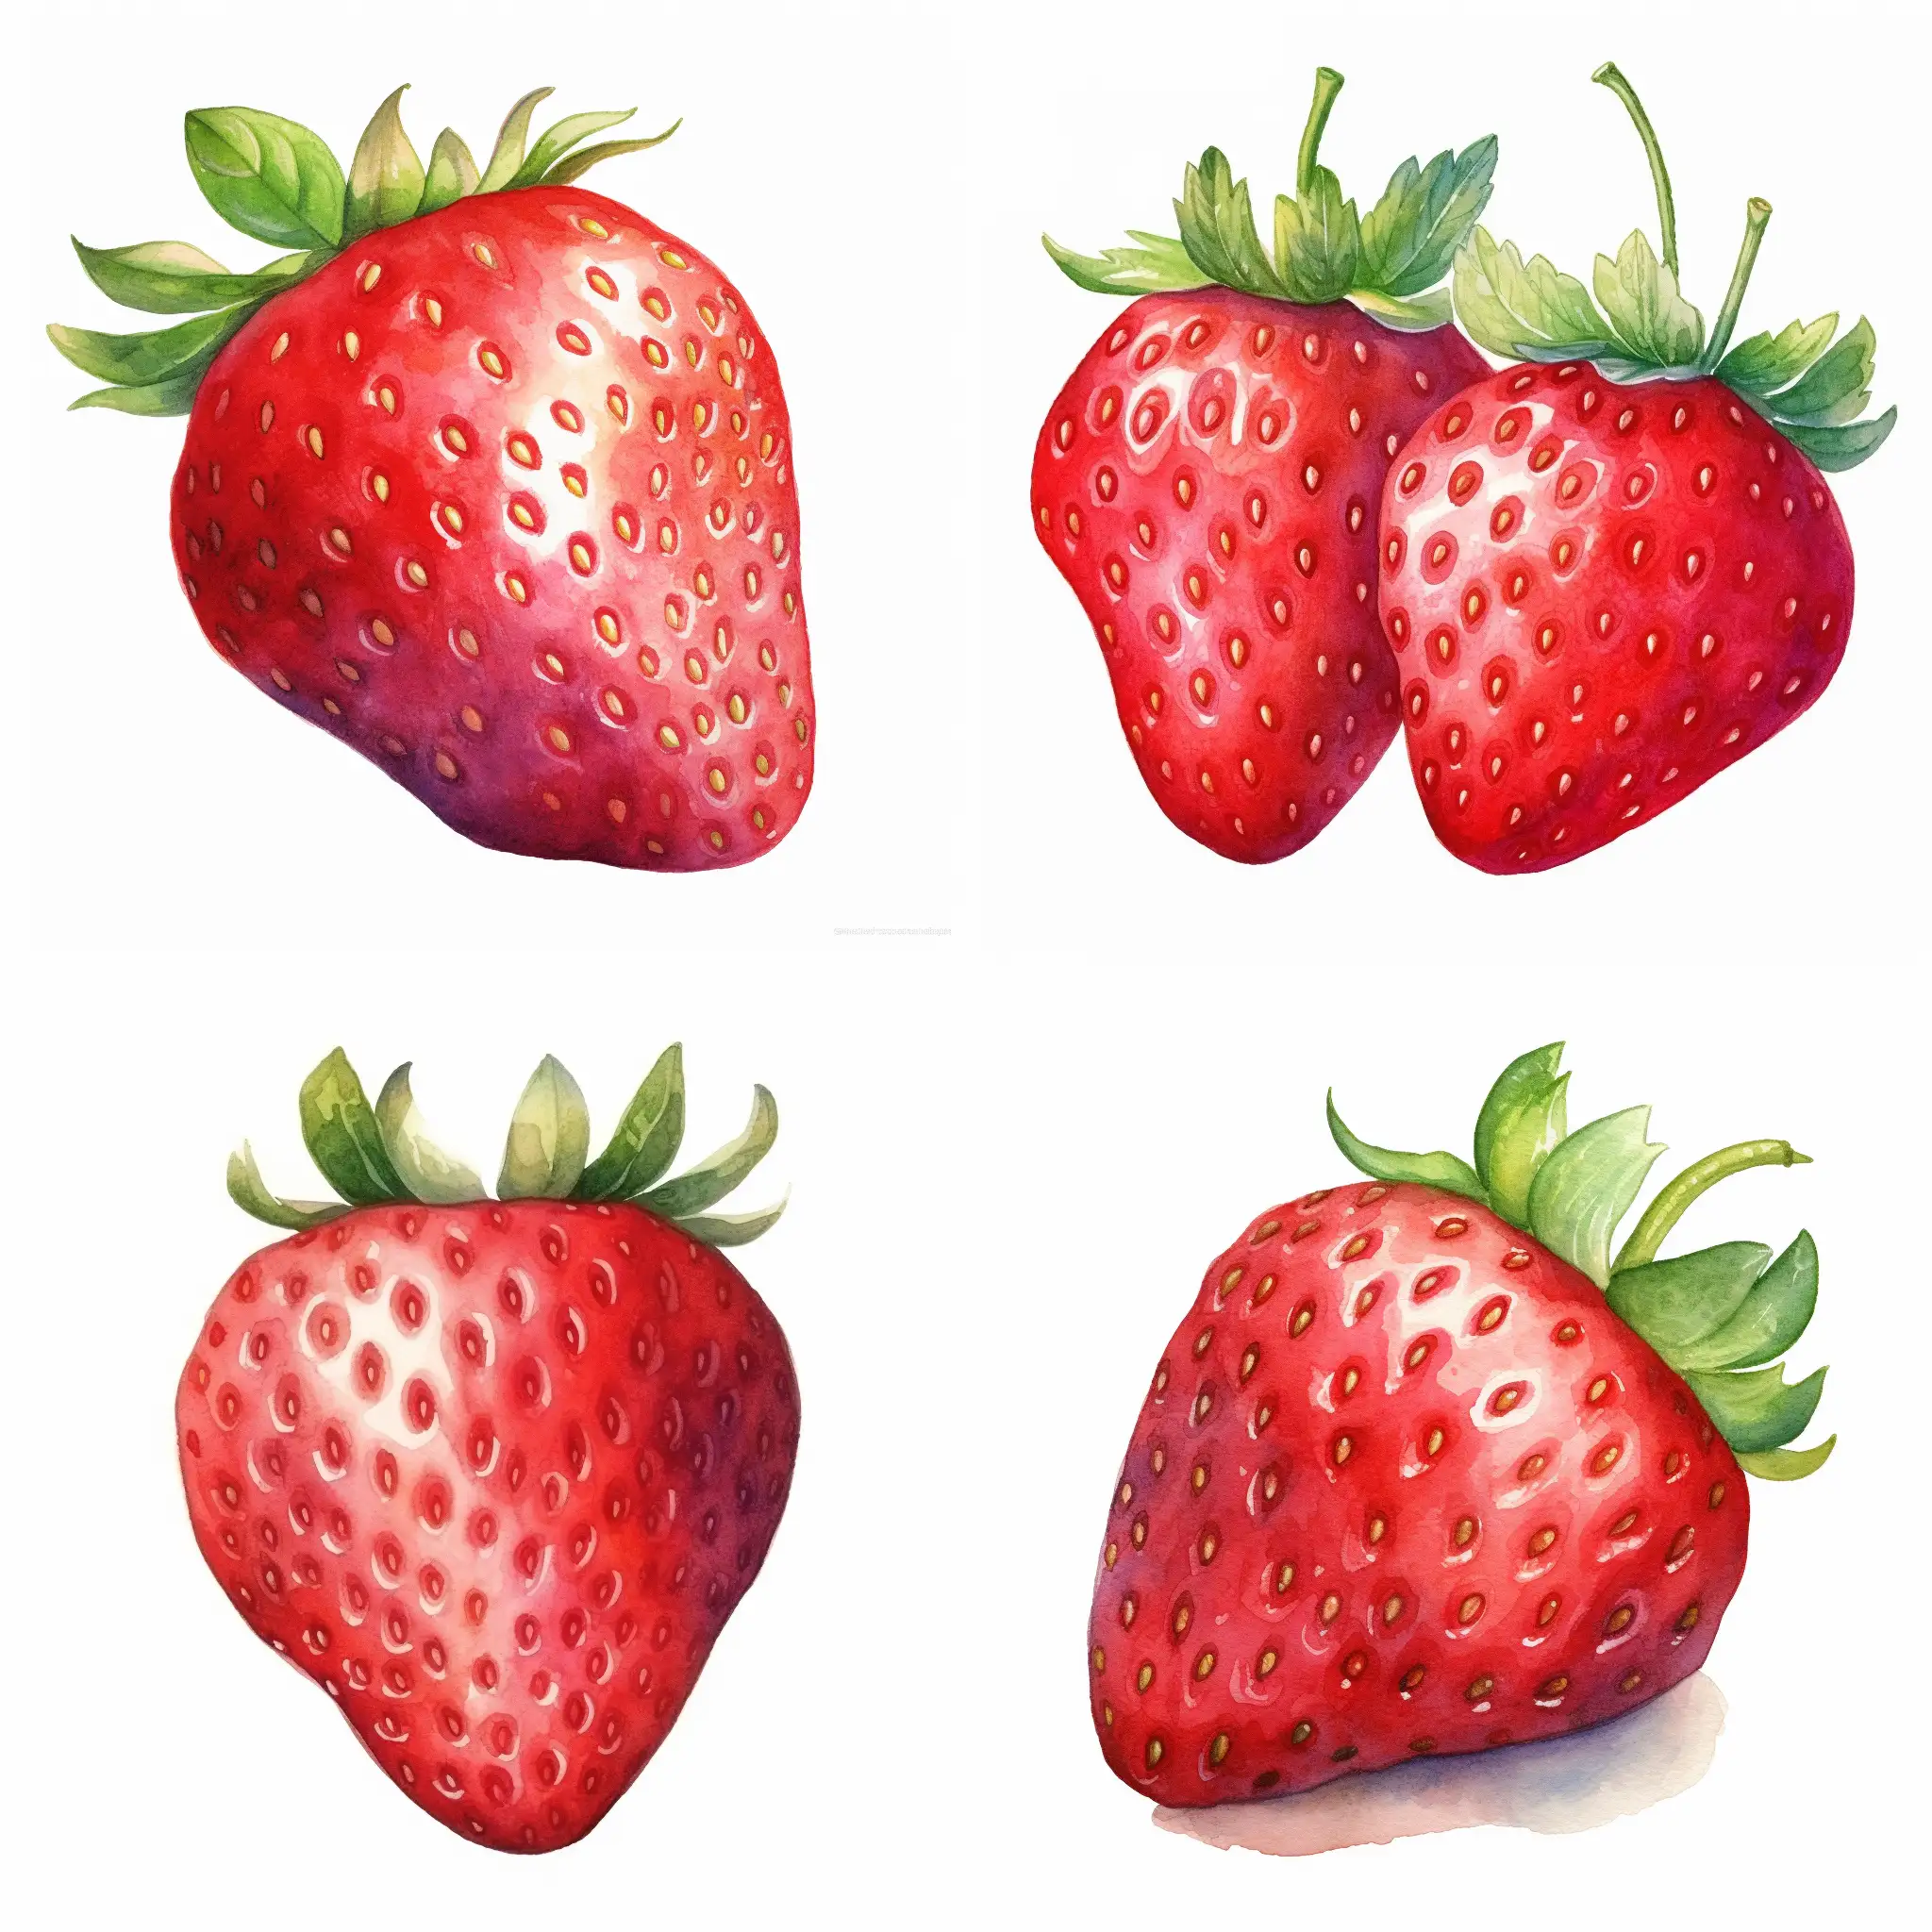 Watercolor strawberry illustration isolated on white background